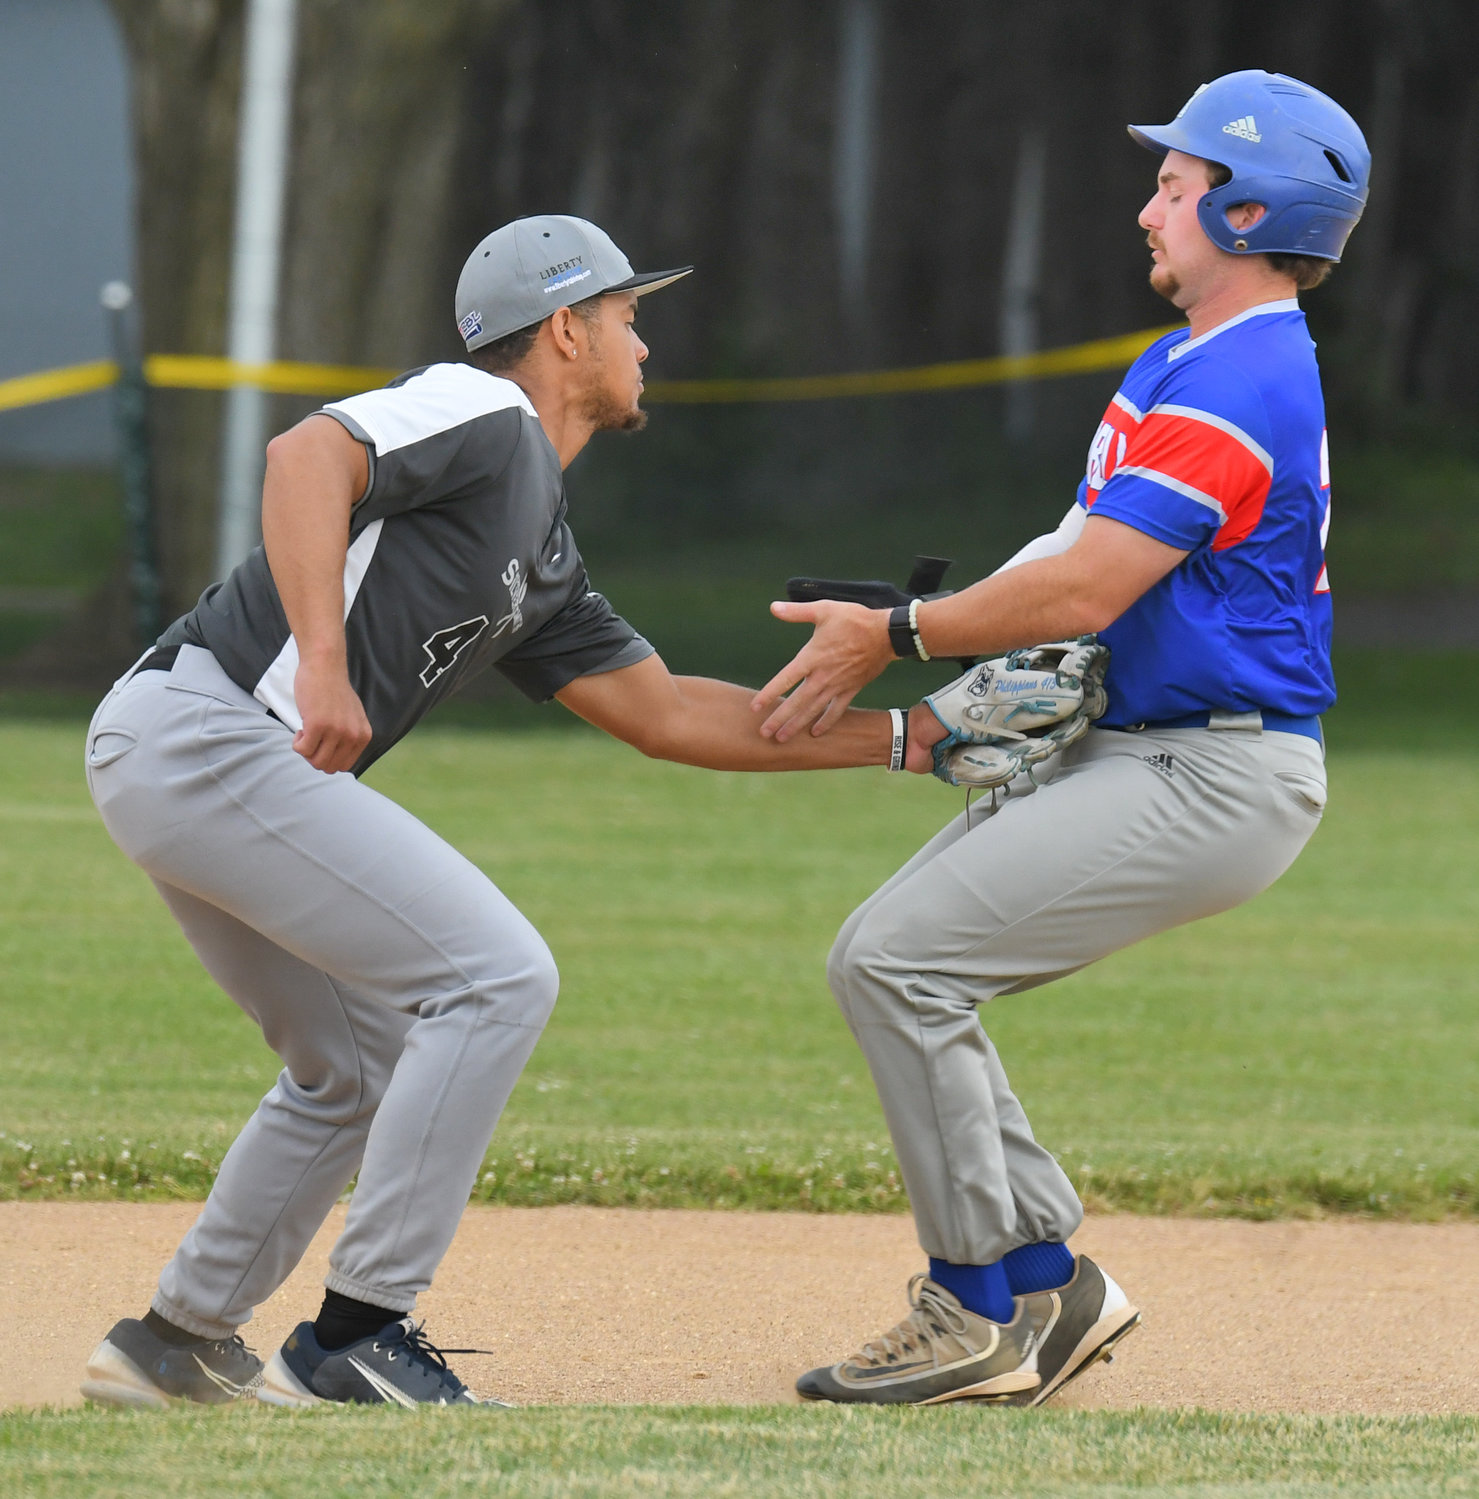 Sherrill Silversmiths shortstop Jaylon Nauden tags out Hornell Steamers baserunner Paxton Hughes in a failed steal attempt in Tuesday’s game. Sherrill won 9-2 at home and Nauden had a hit and scored a run.